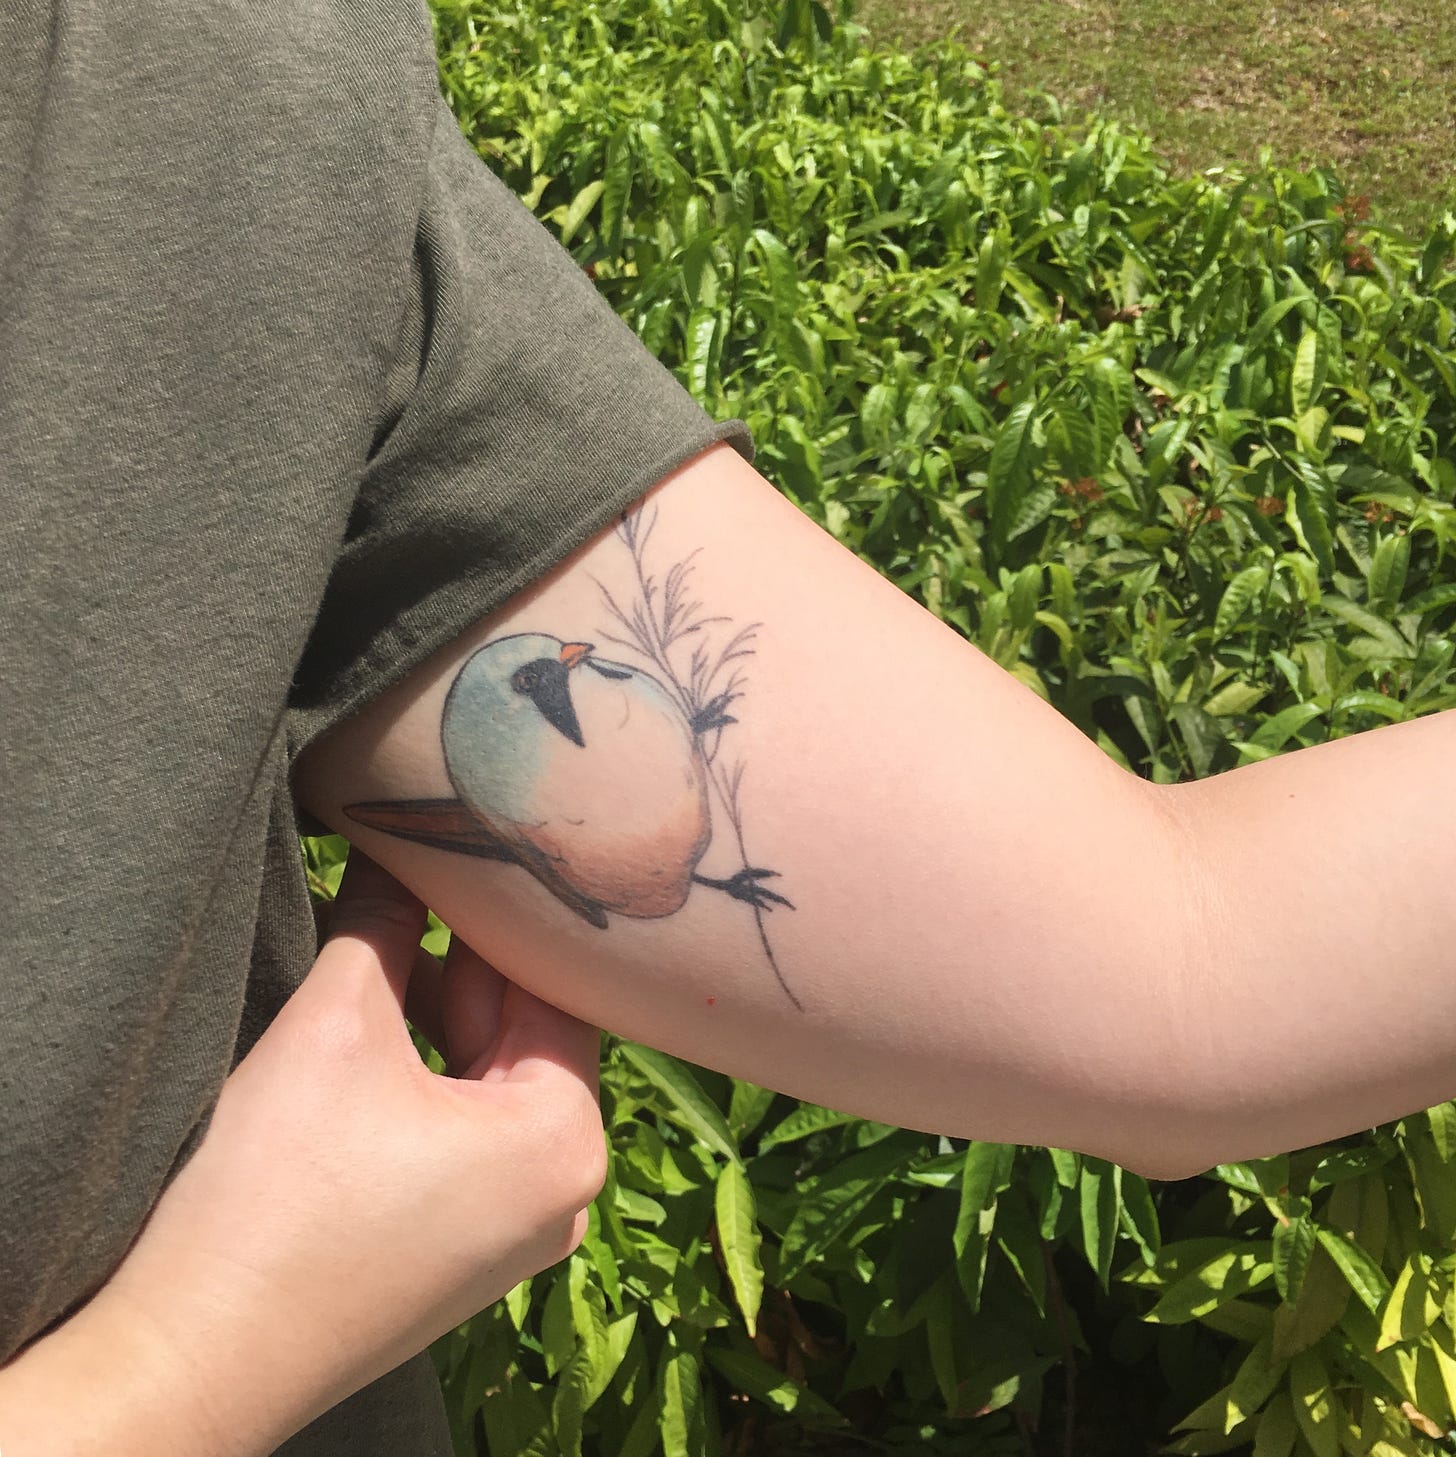 image description: Sophia Baughan's tattoo of a small bearded reedling on the inside of my left bicep, against a background of grass.